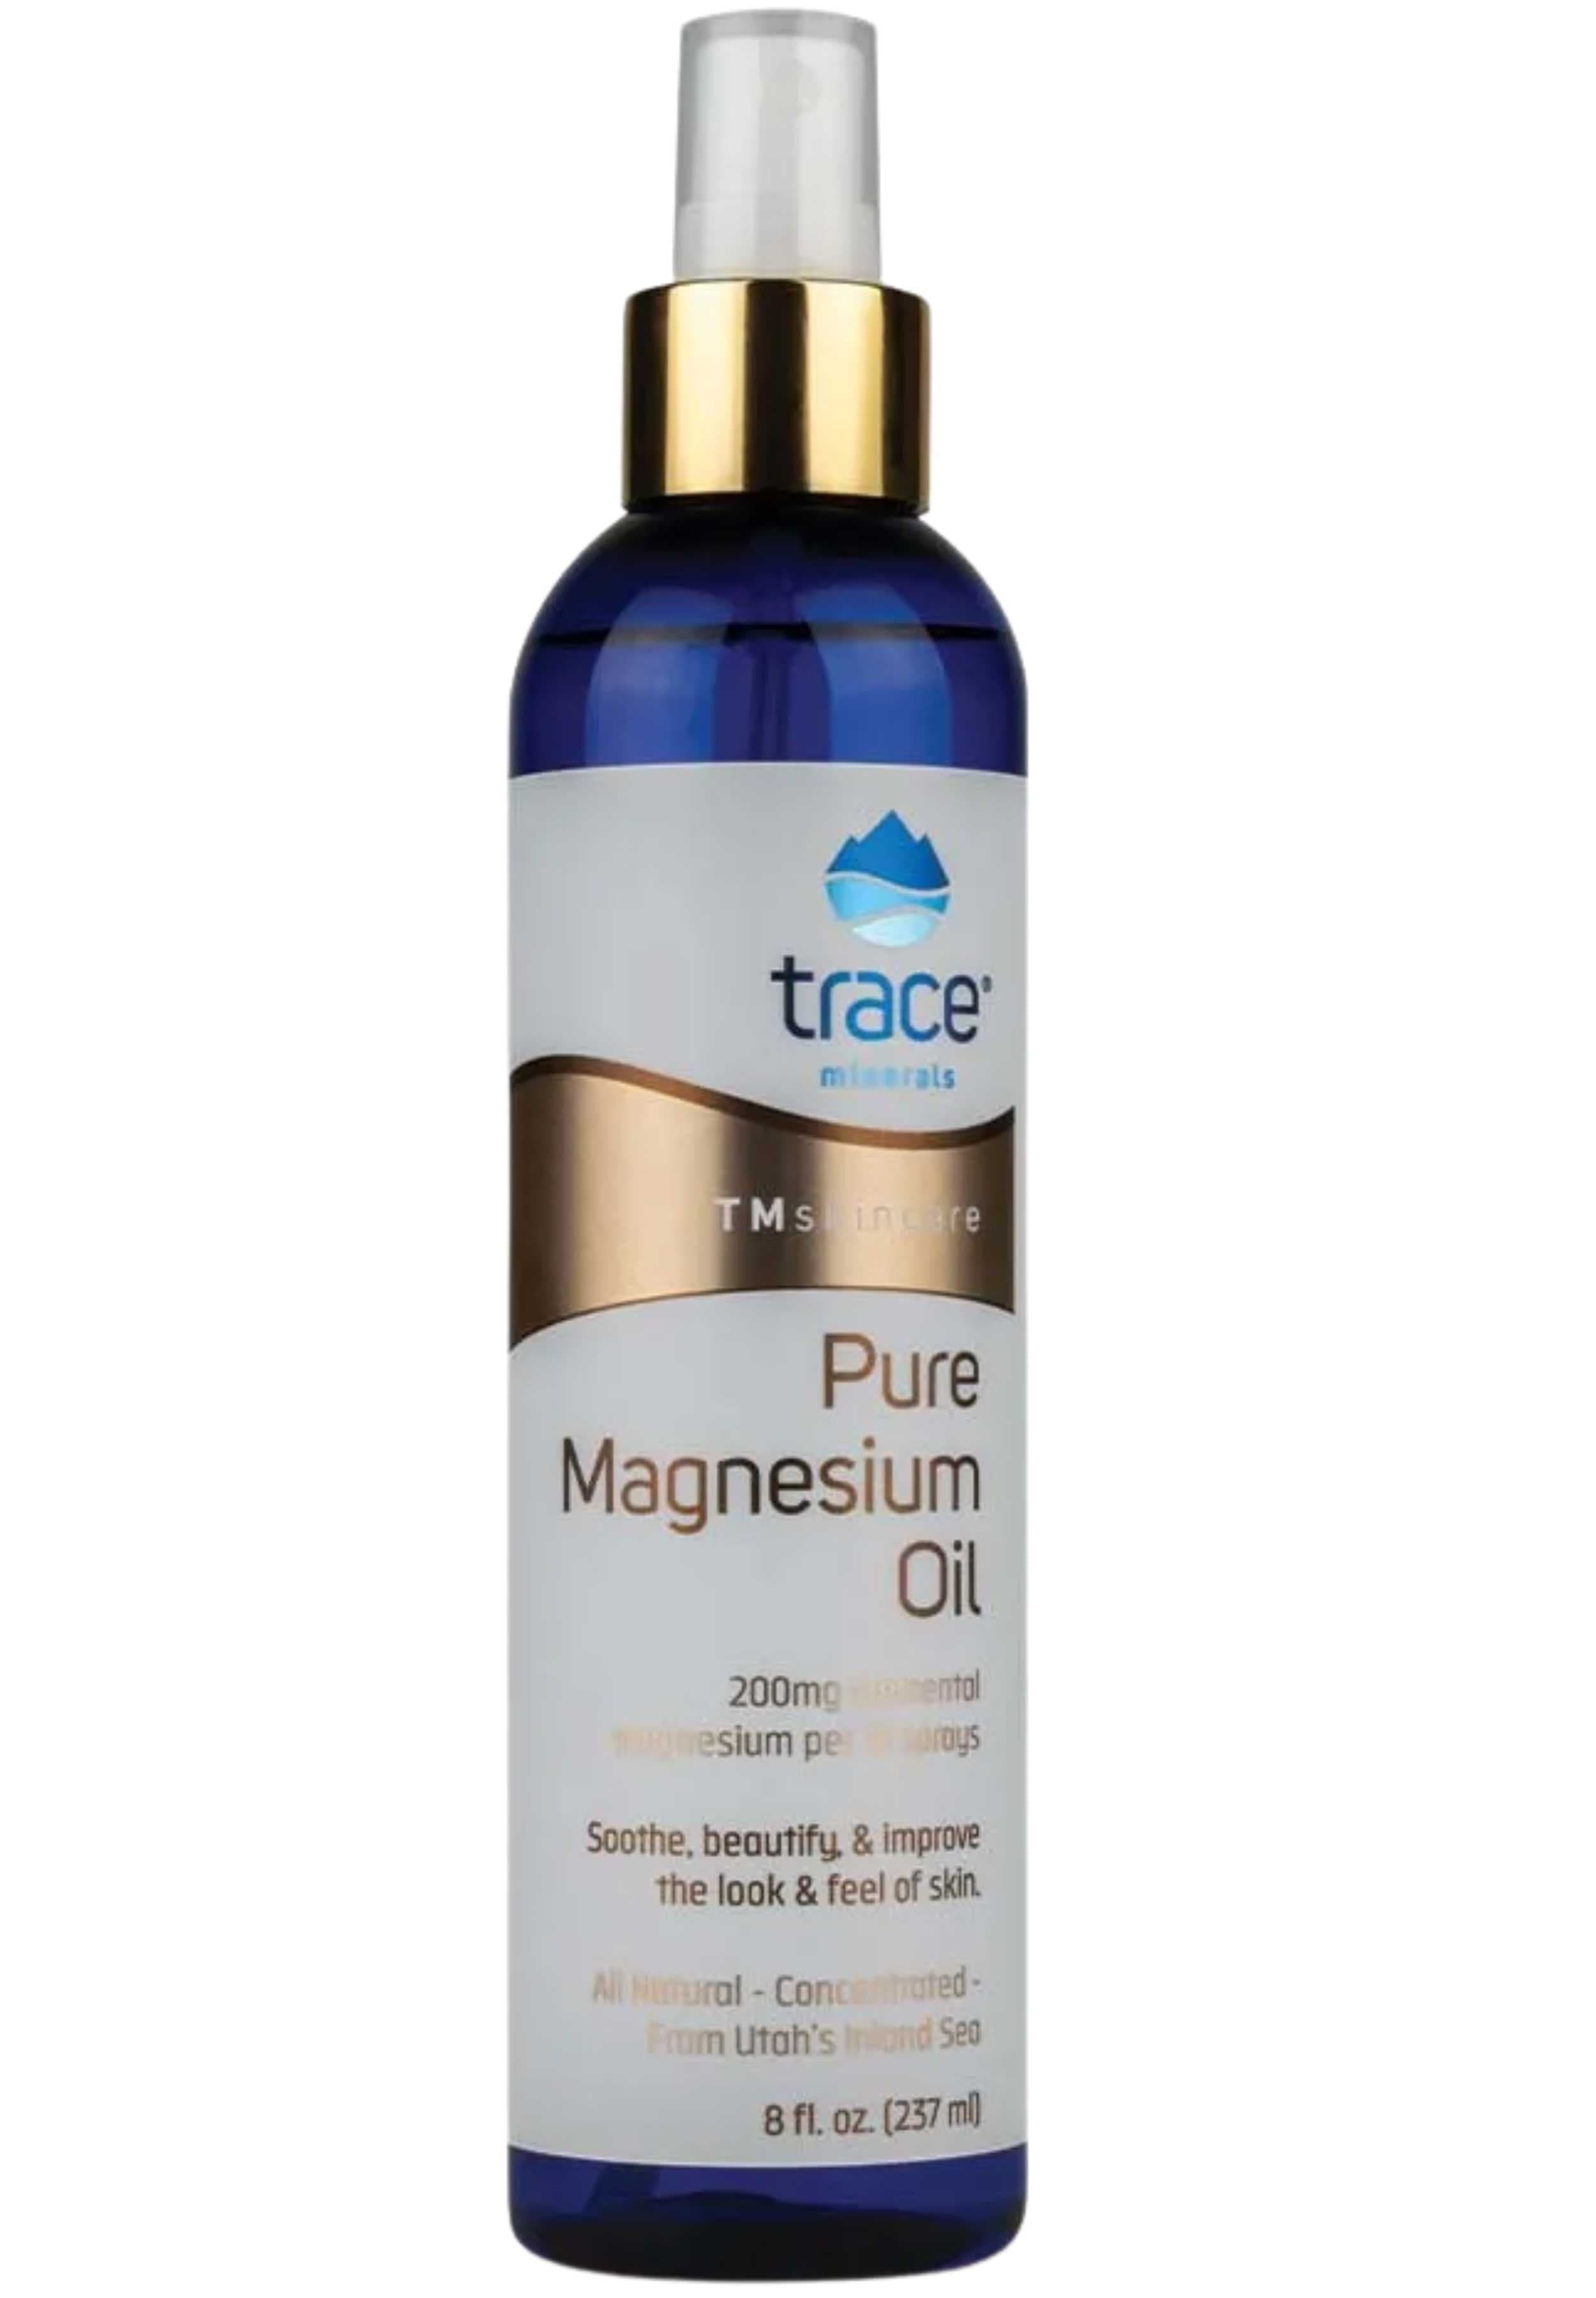 Trace Minerals Research Pure Magnesium Oil